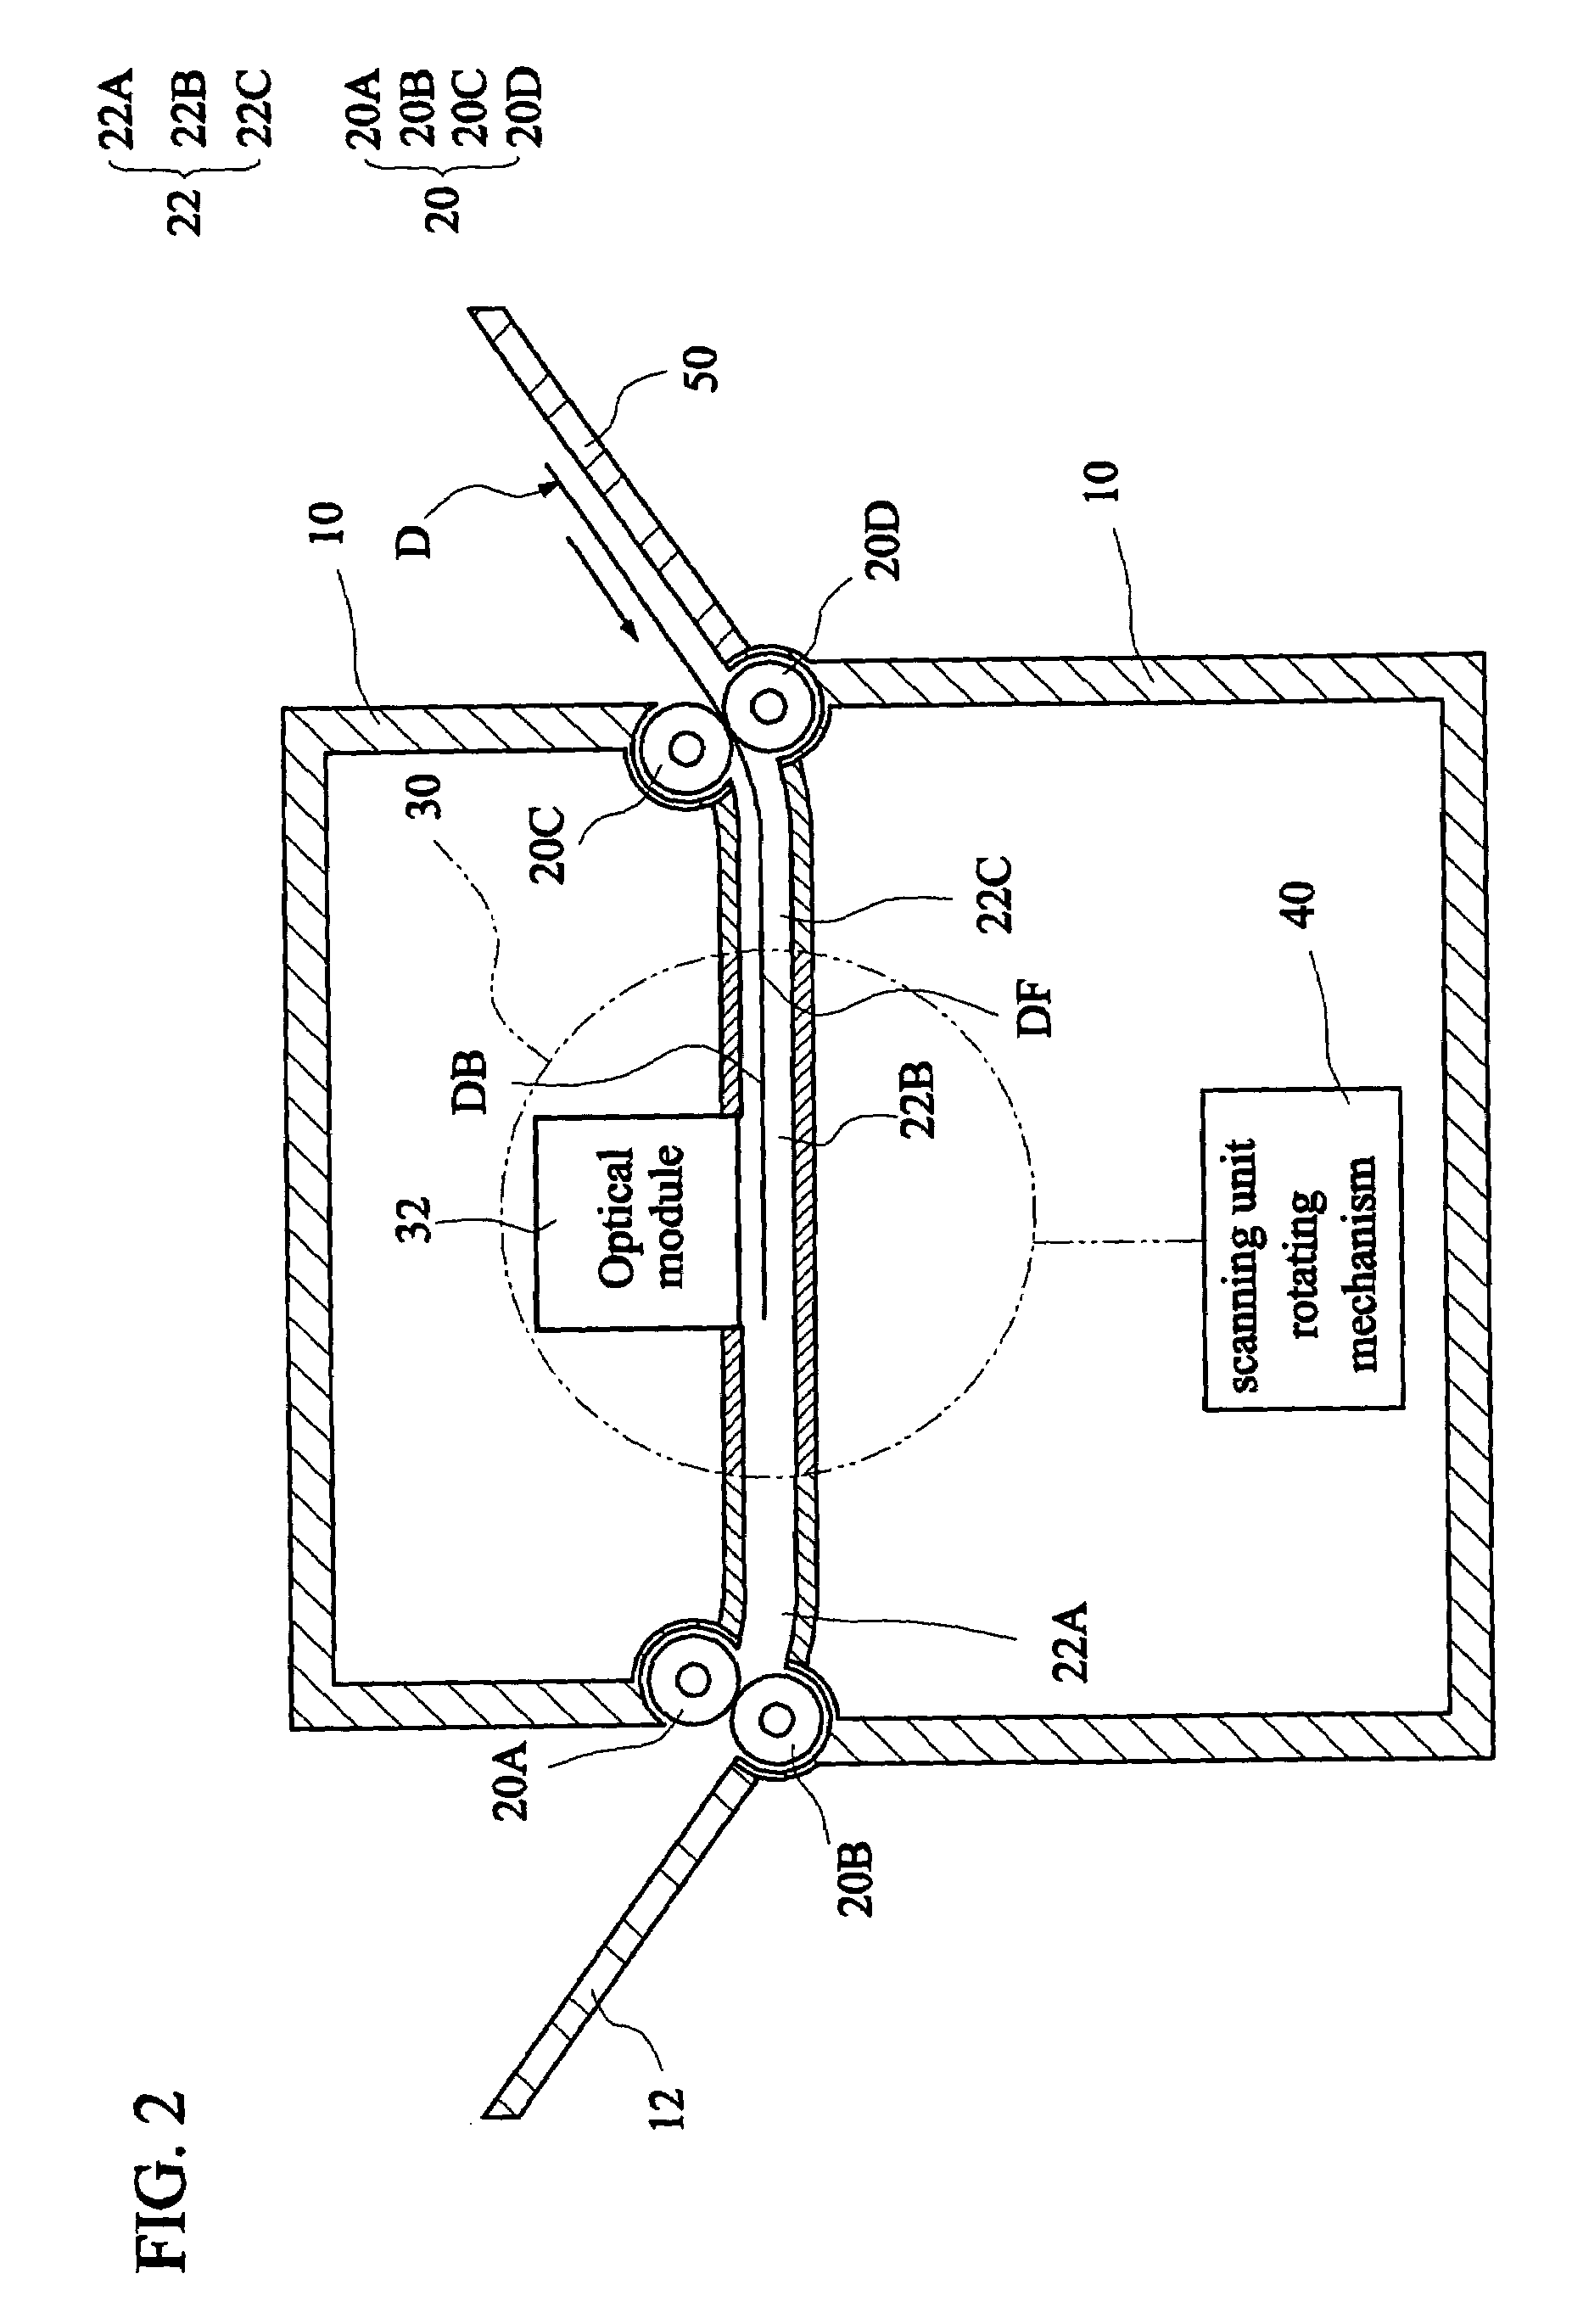 Duplex scanning device having a rotatable scanning unit and duplex scanning method thereof